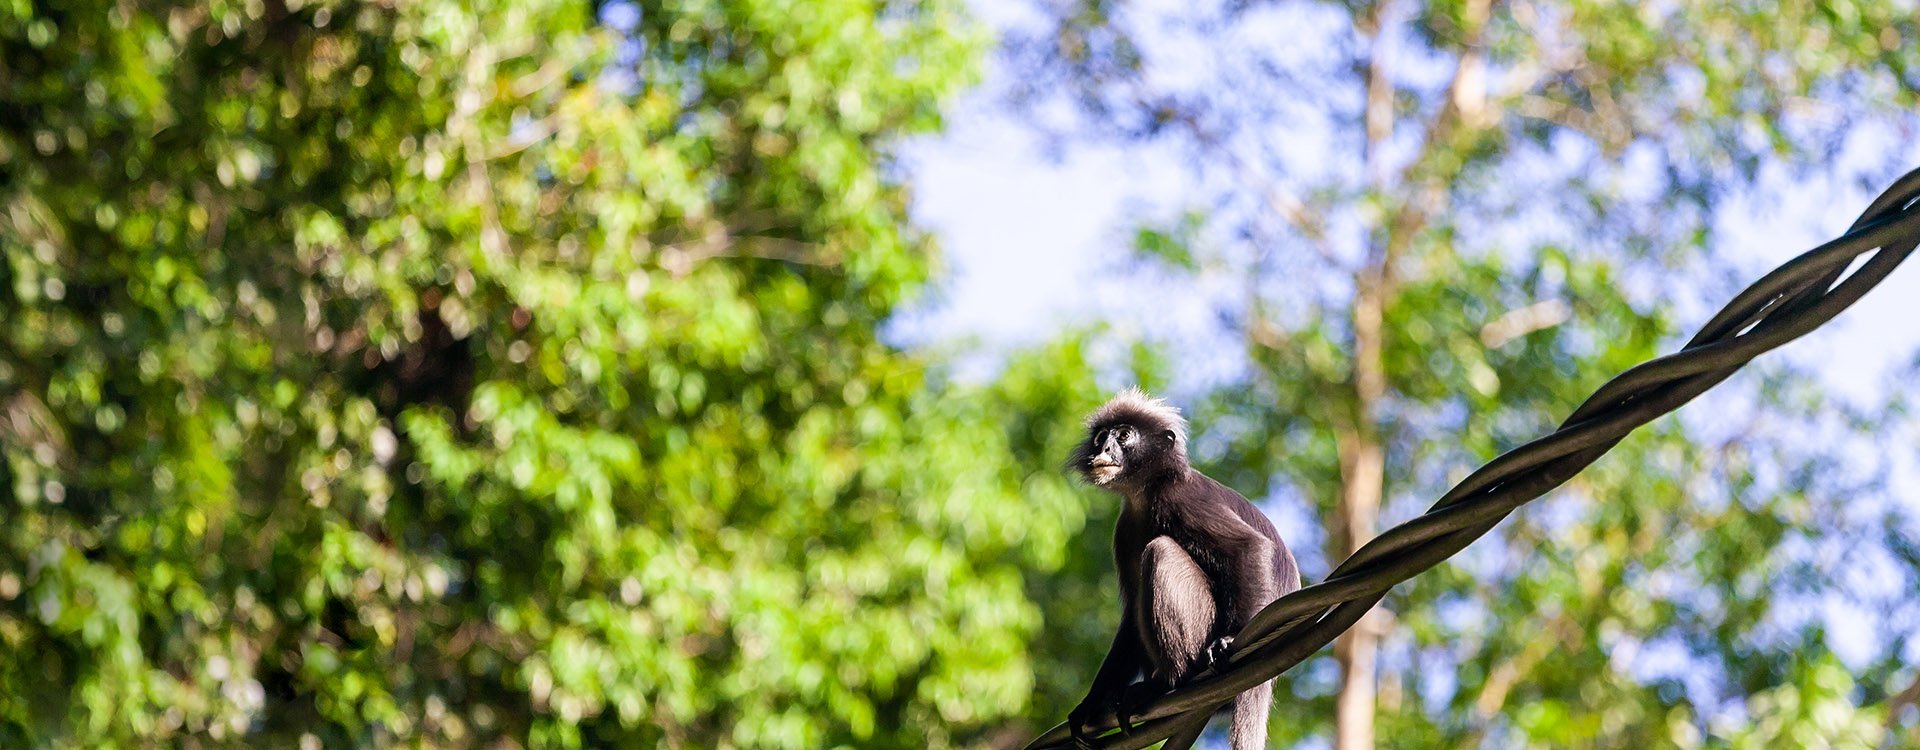 Dusky Langur Monkey sitting on wire in the rainforest, Langkawi, Malaysia